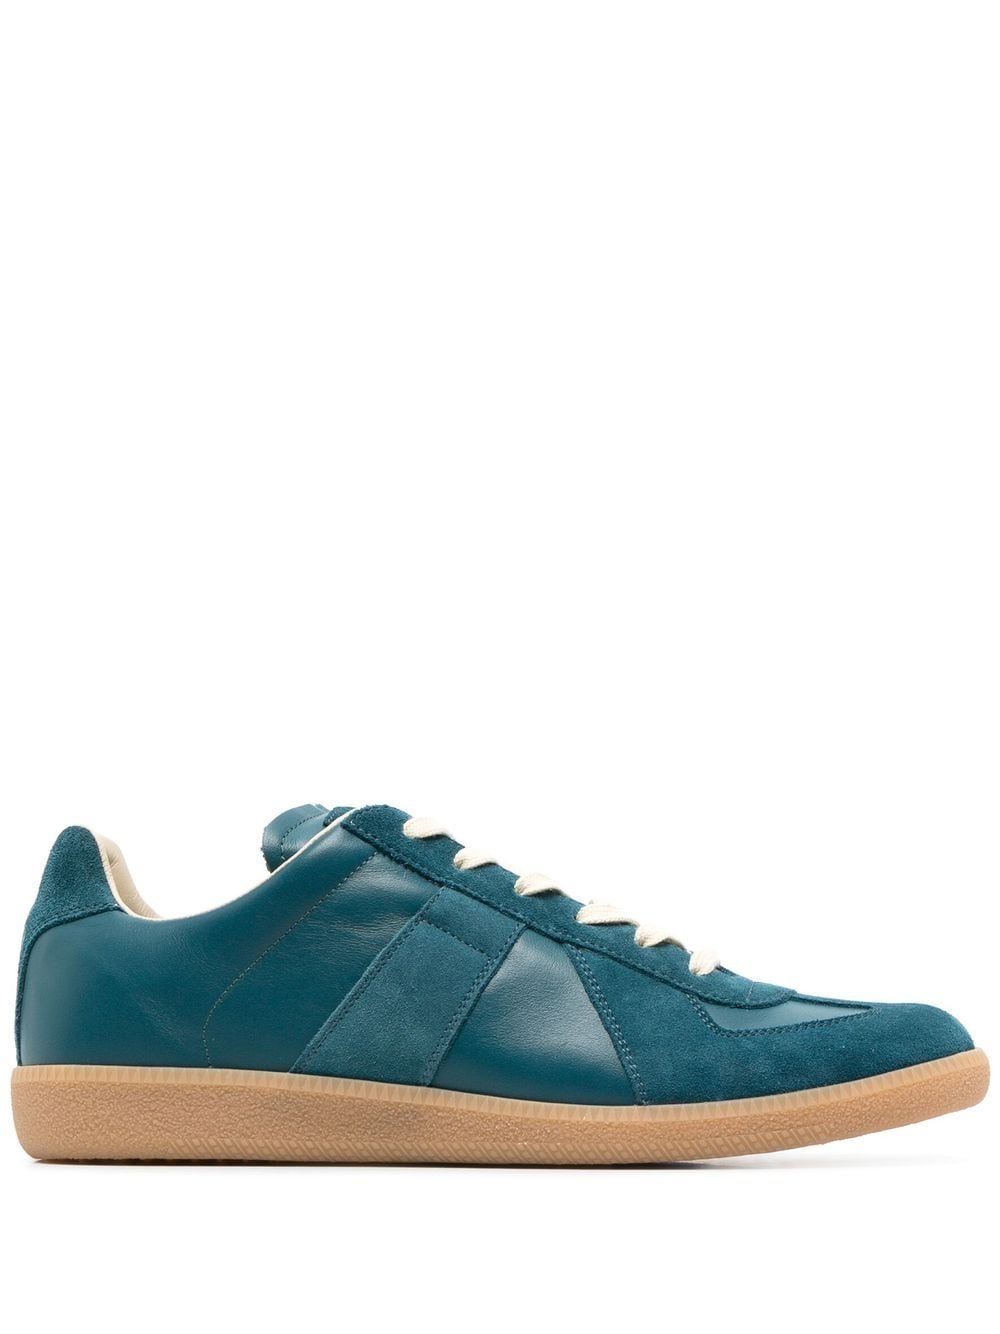 Maison Margiela Blue Replica Suede And Leather Sneakers In Octane